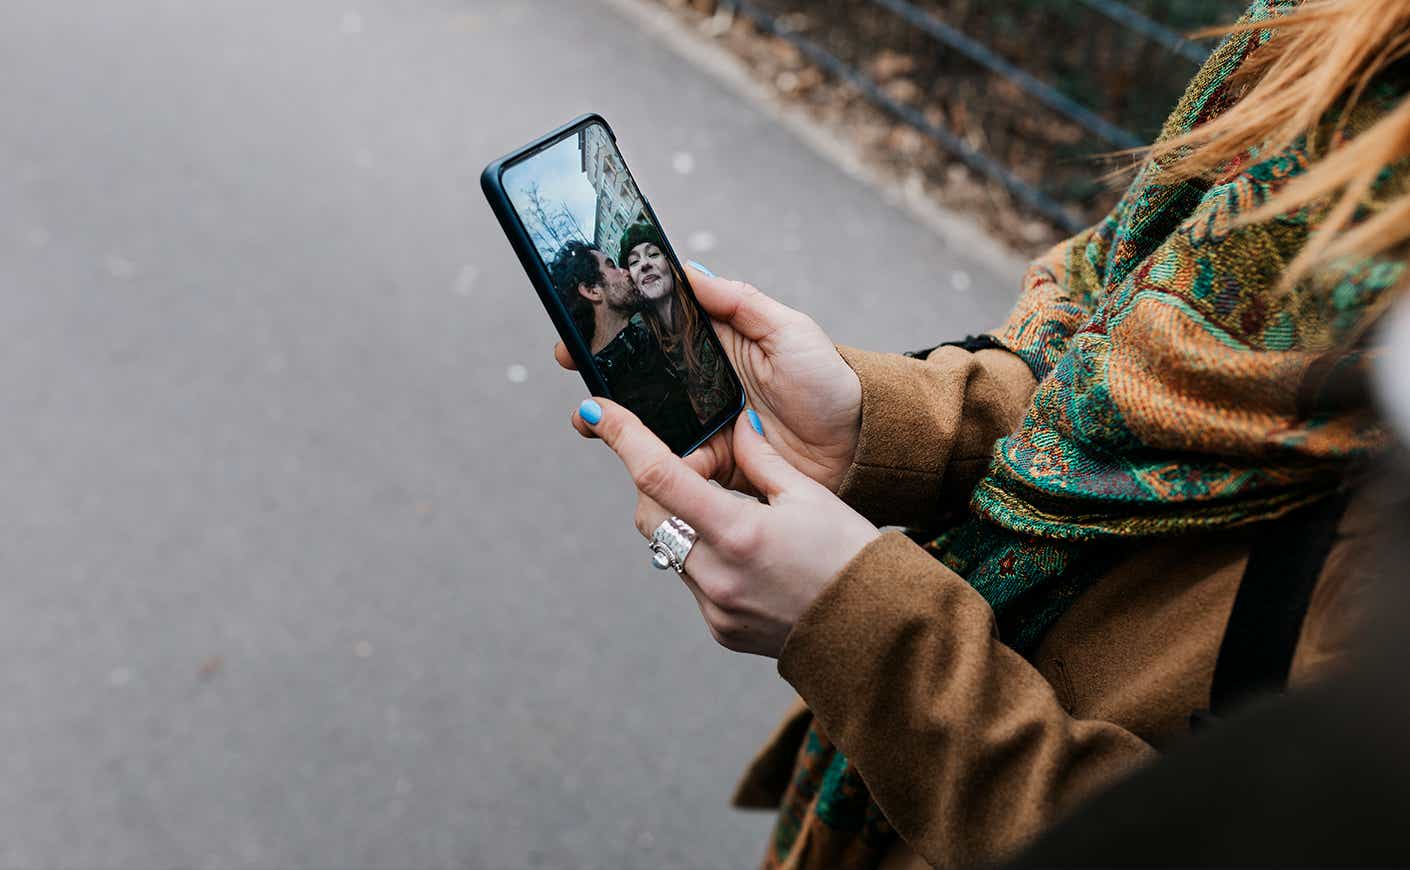 A woman showing her boyfriend a selfie she took of the two of them on her smartphone while out for a walk in the city together